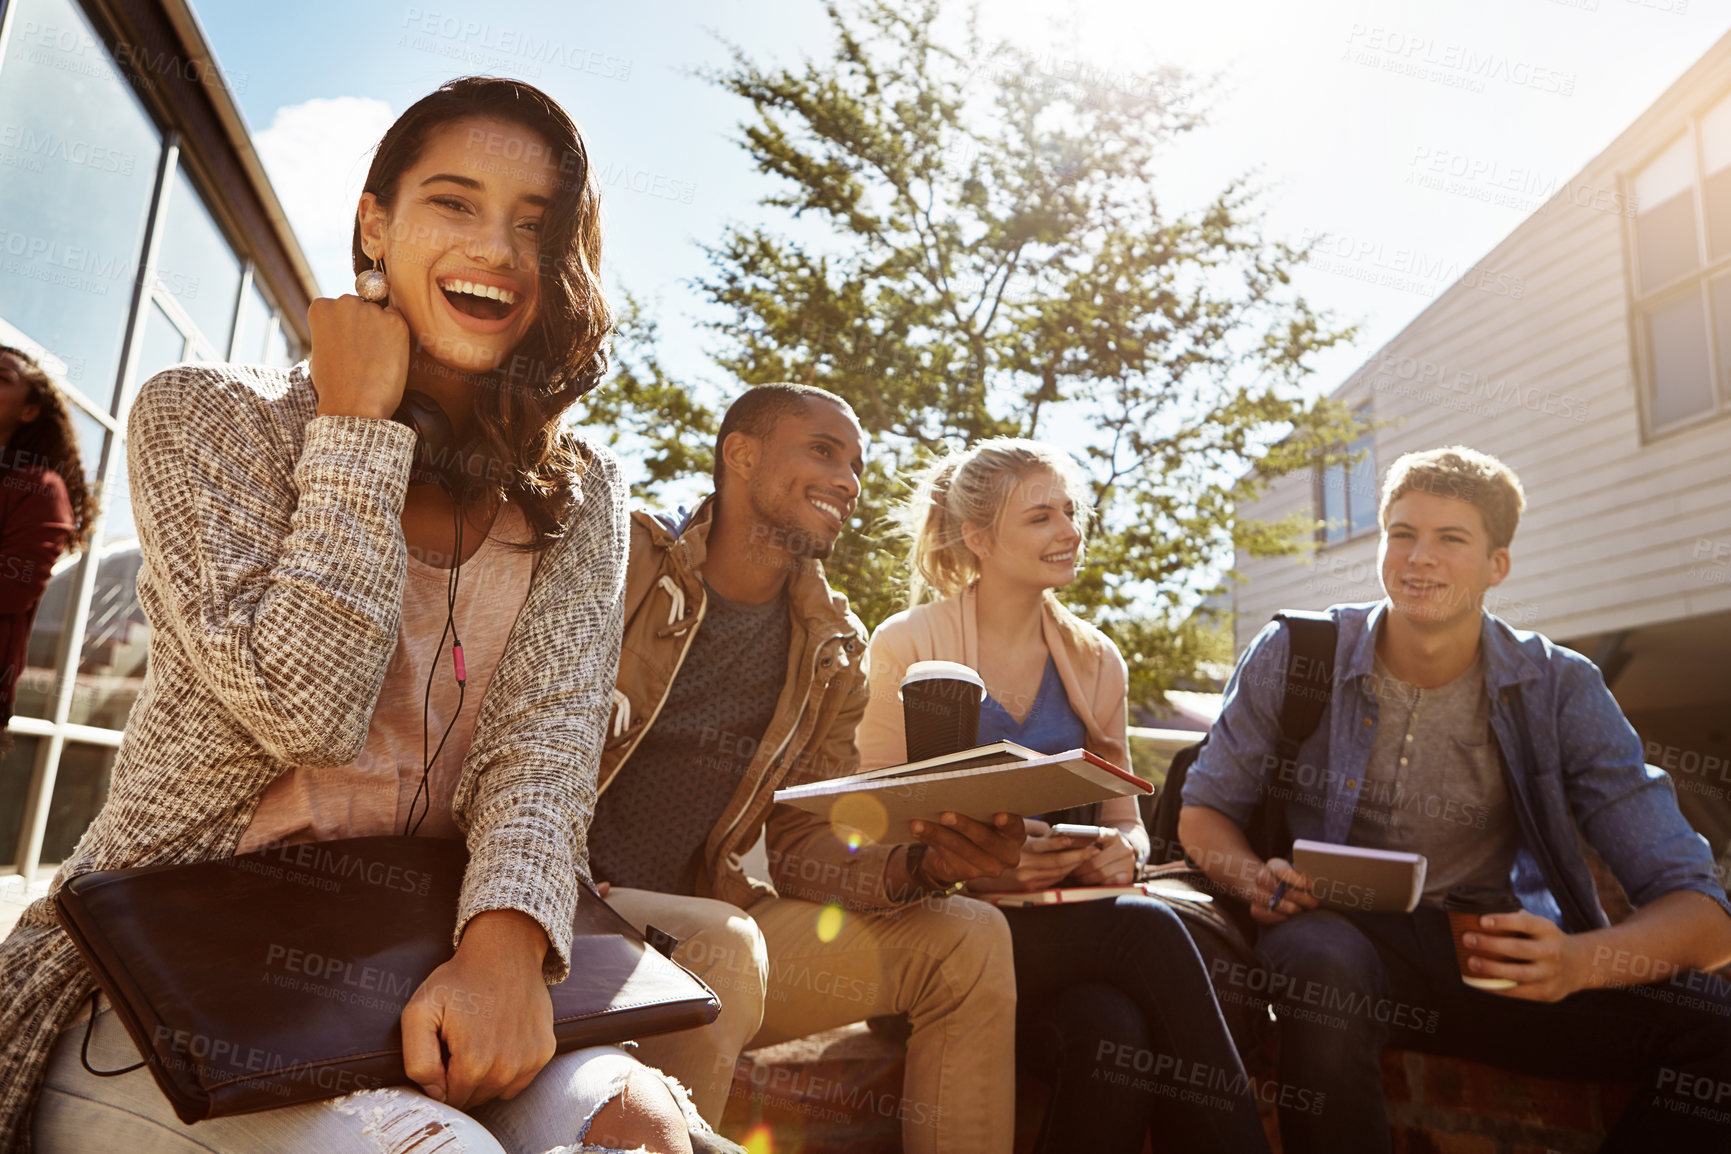 Buy stock photo Shot of a student sitting outside on campus with her friends blurred in the background